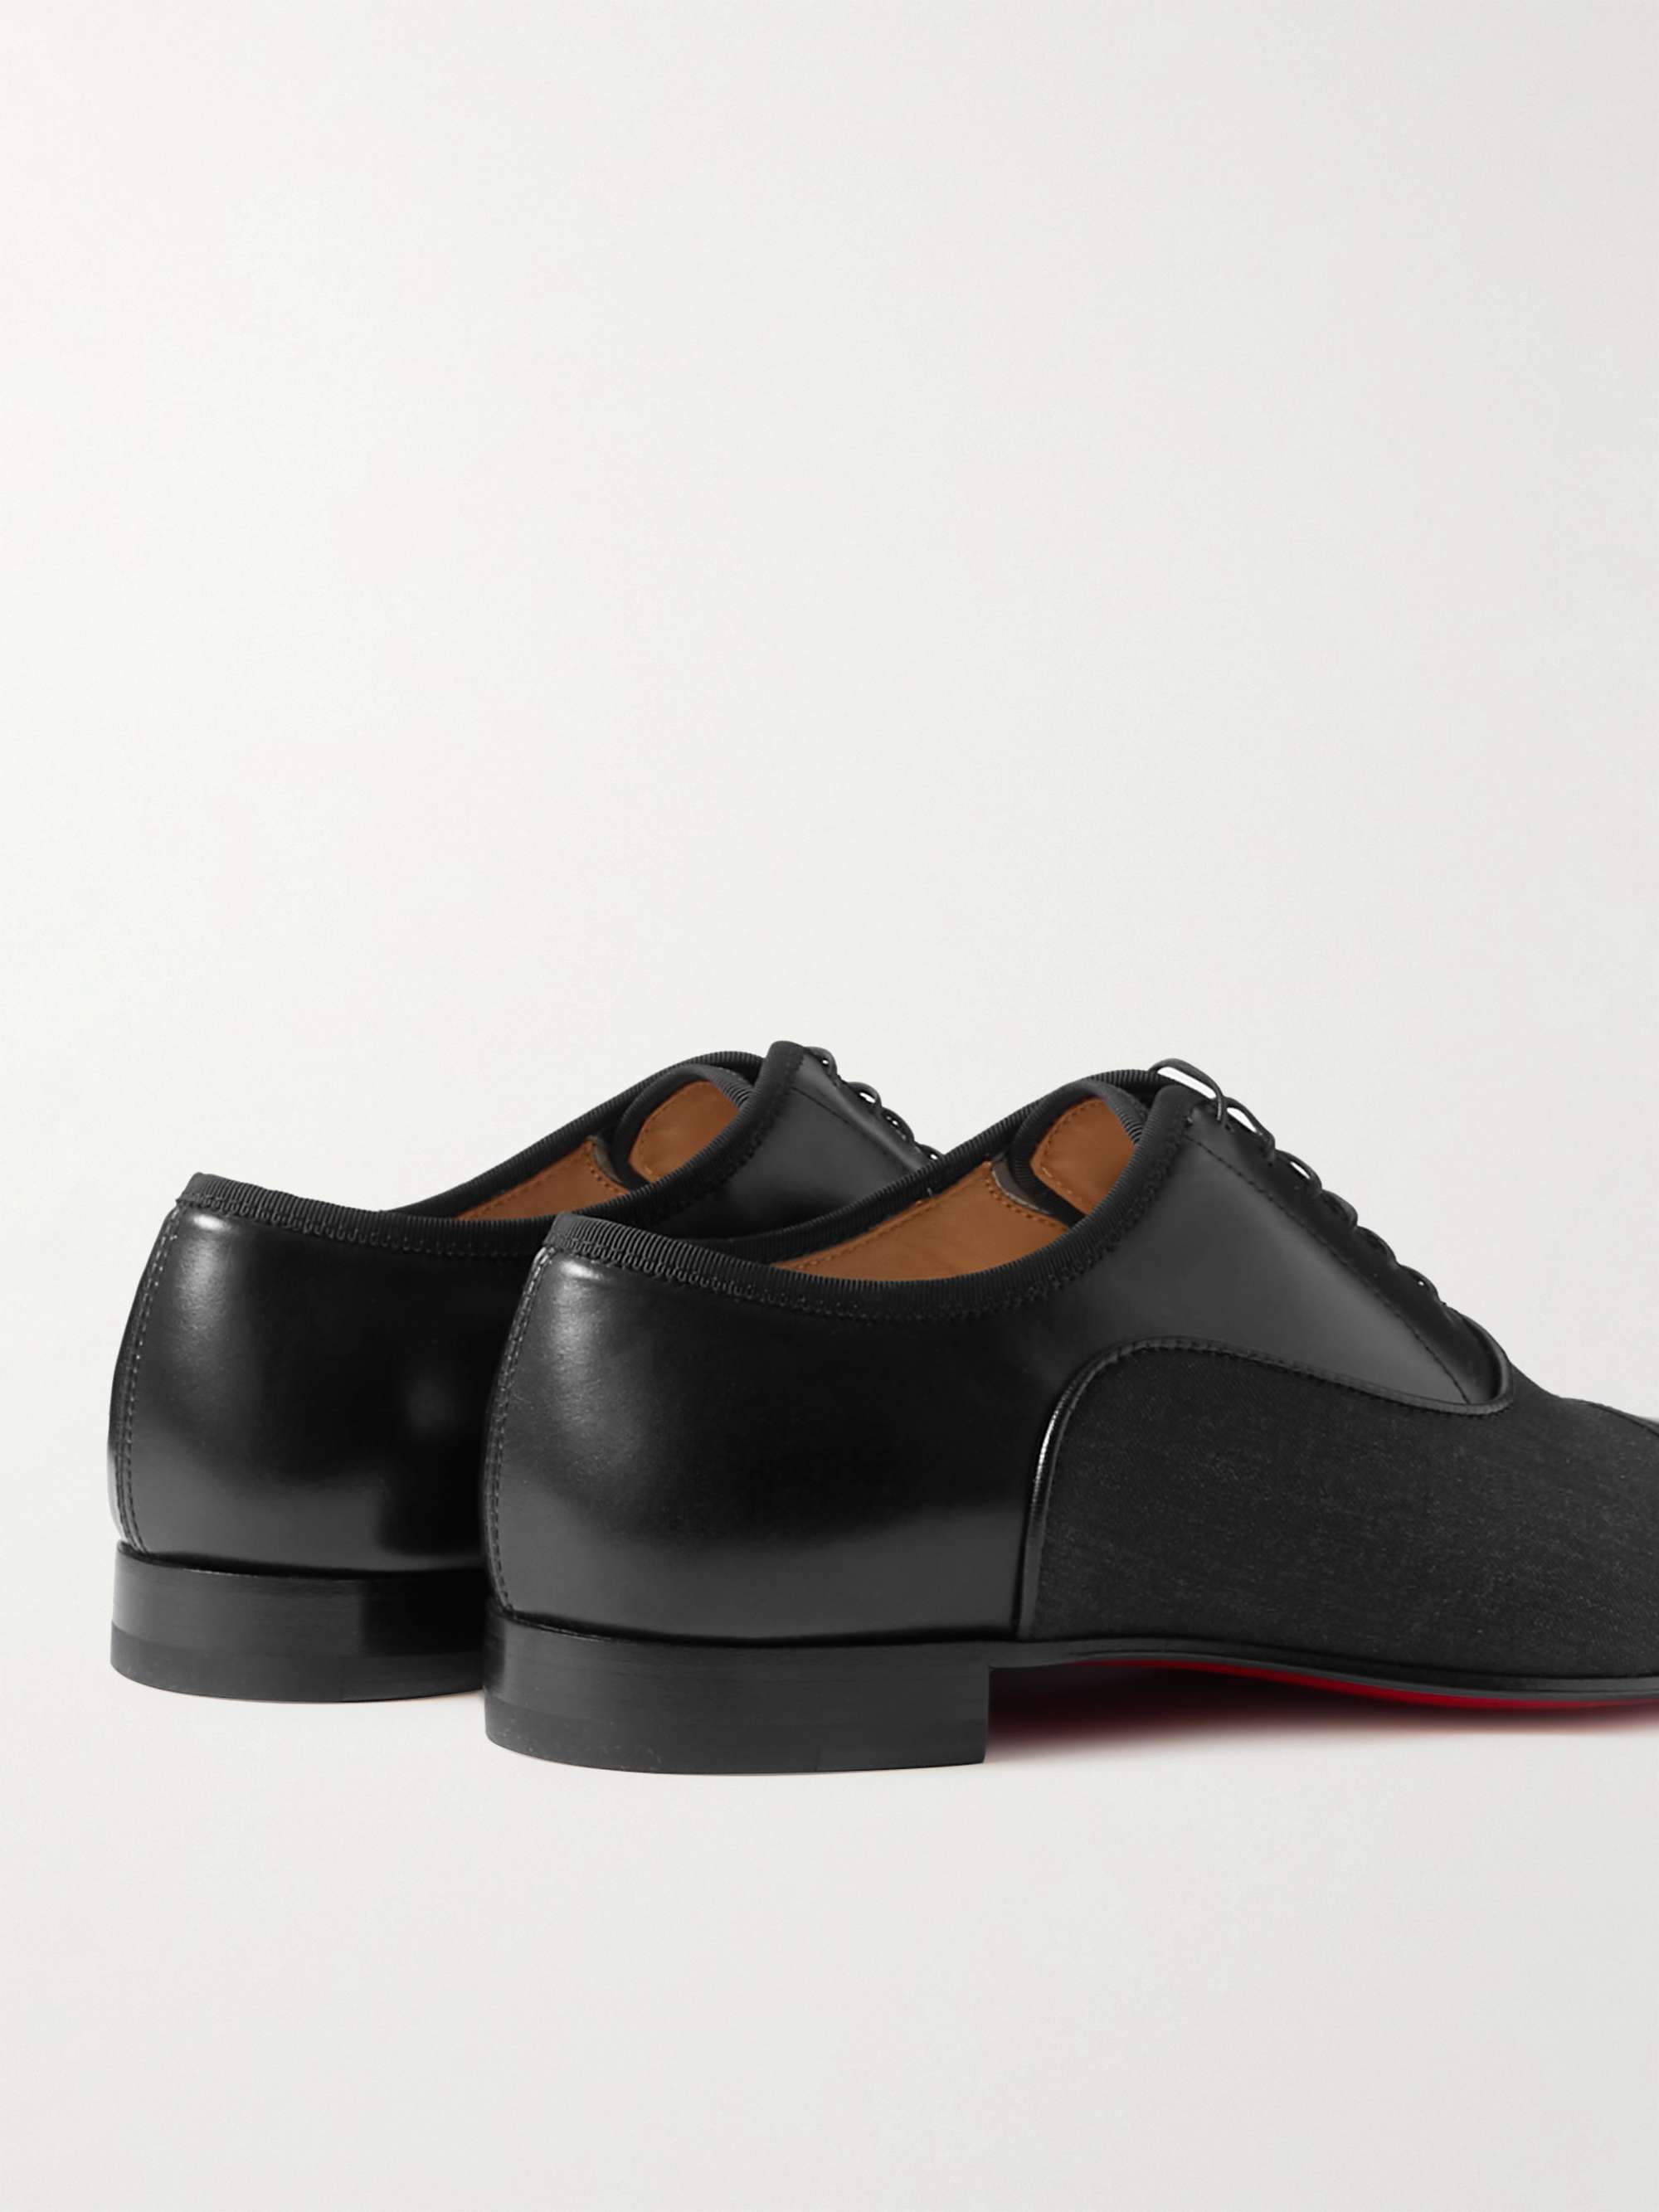 CHRISTIAN LOUBOUTIN Greggo Leather and Canvas Oxford Shoes